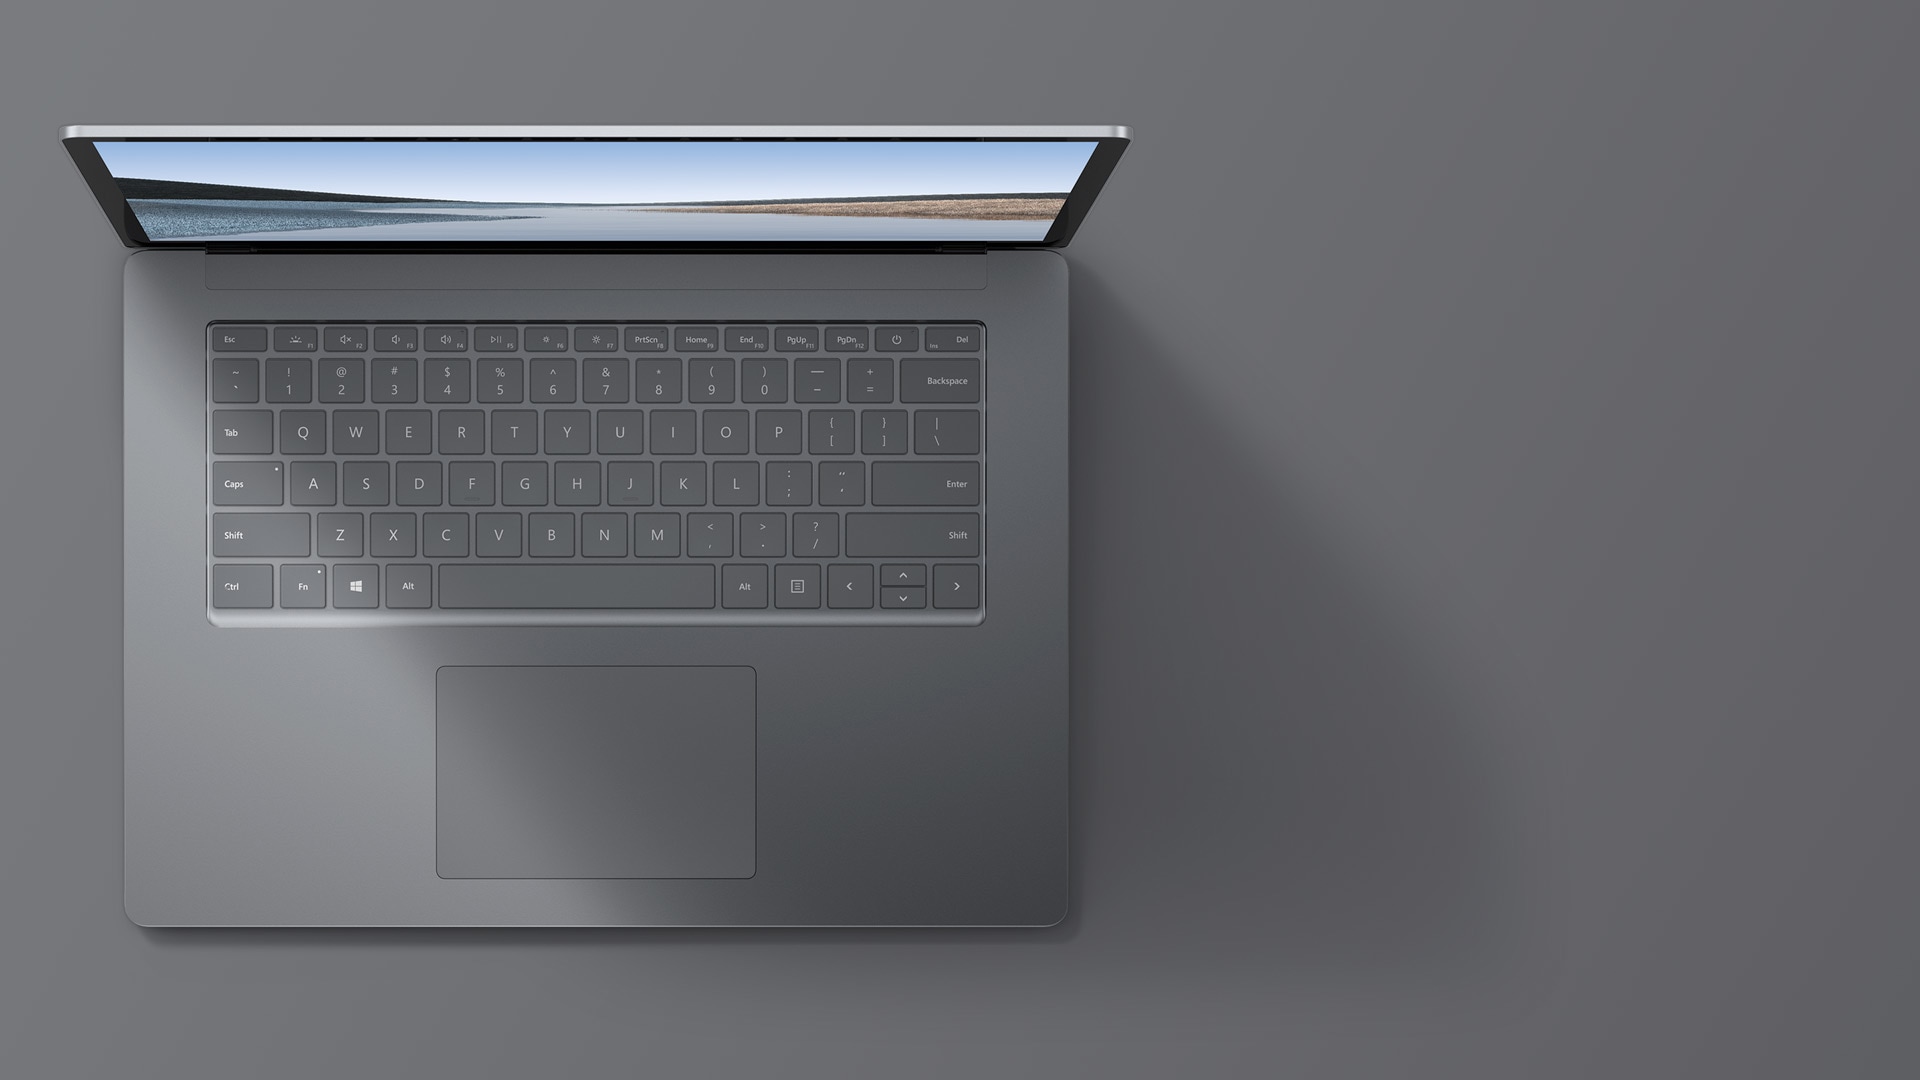 15” Surface Laptop 3 in Platinum with a metal finish